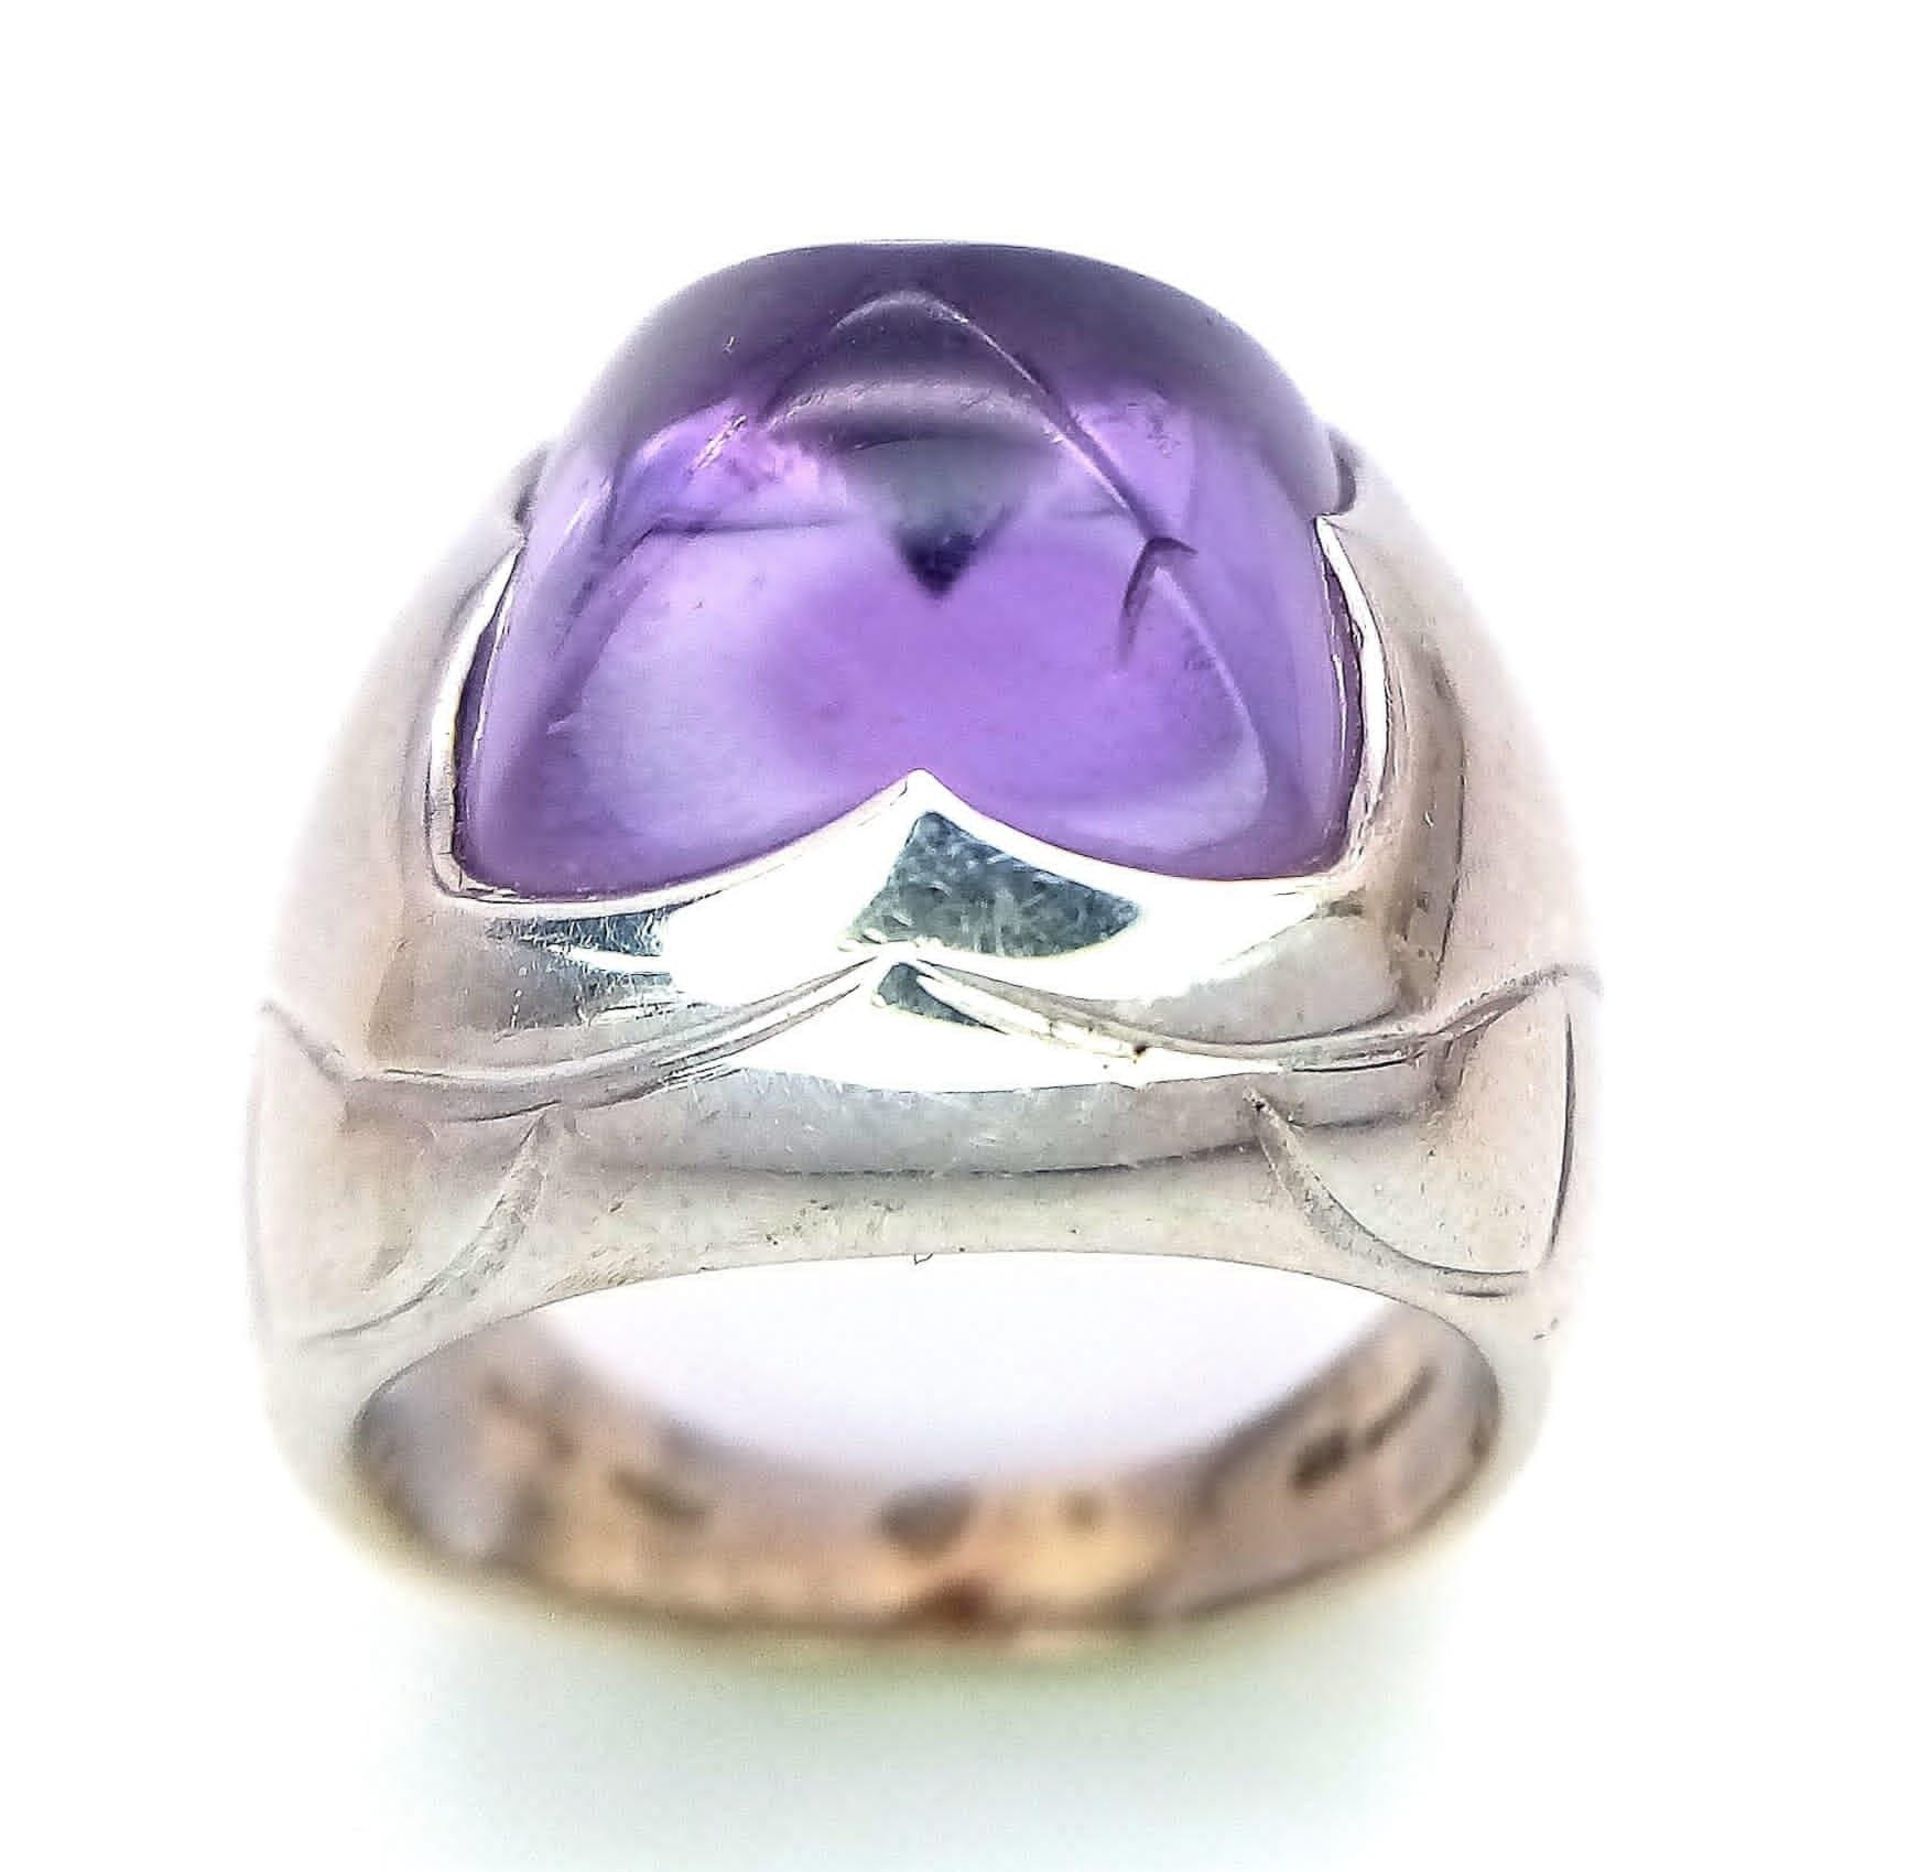 An 18K White Gold Bulgari Amethyst Pyramid Ring. Size K. 16.41g total weight. Ref: 016531 - Image 3 of 7